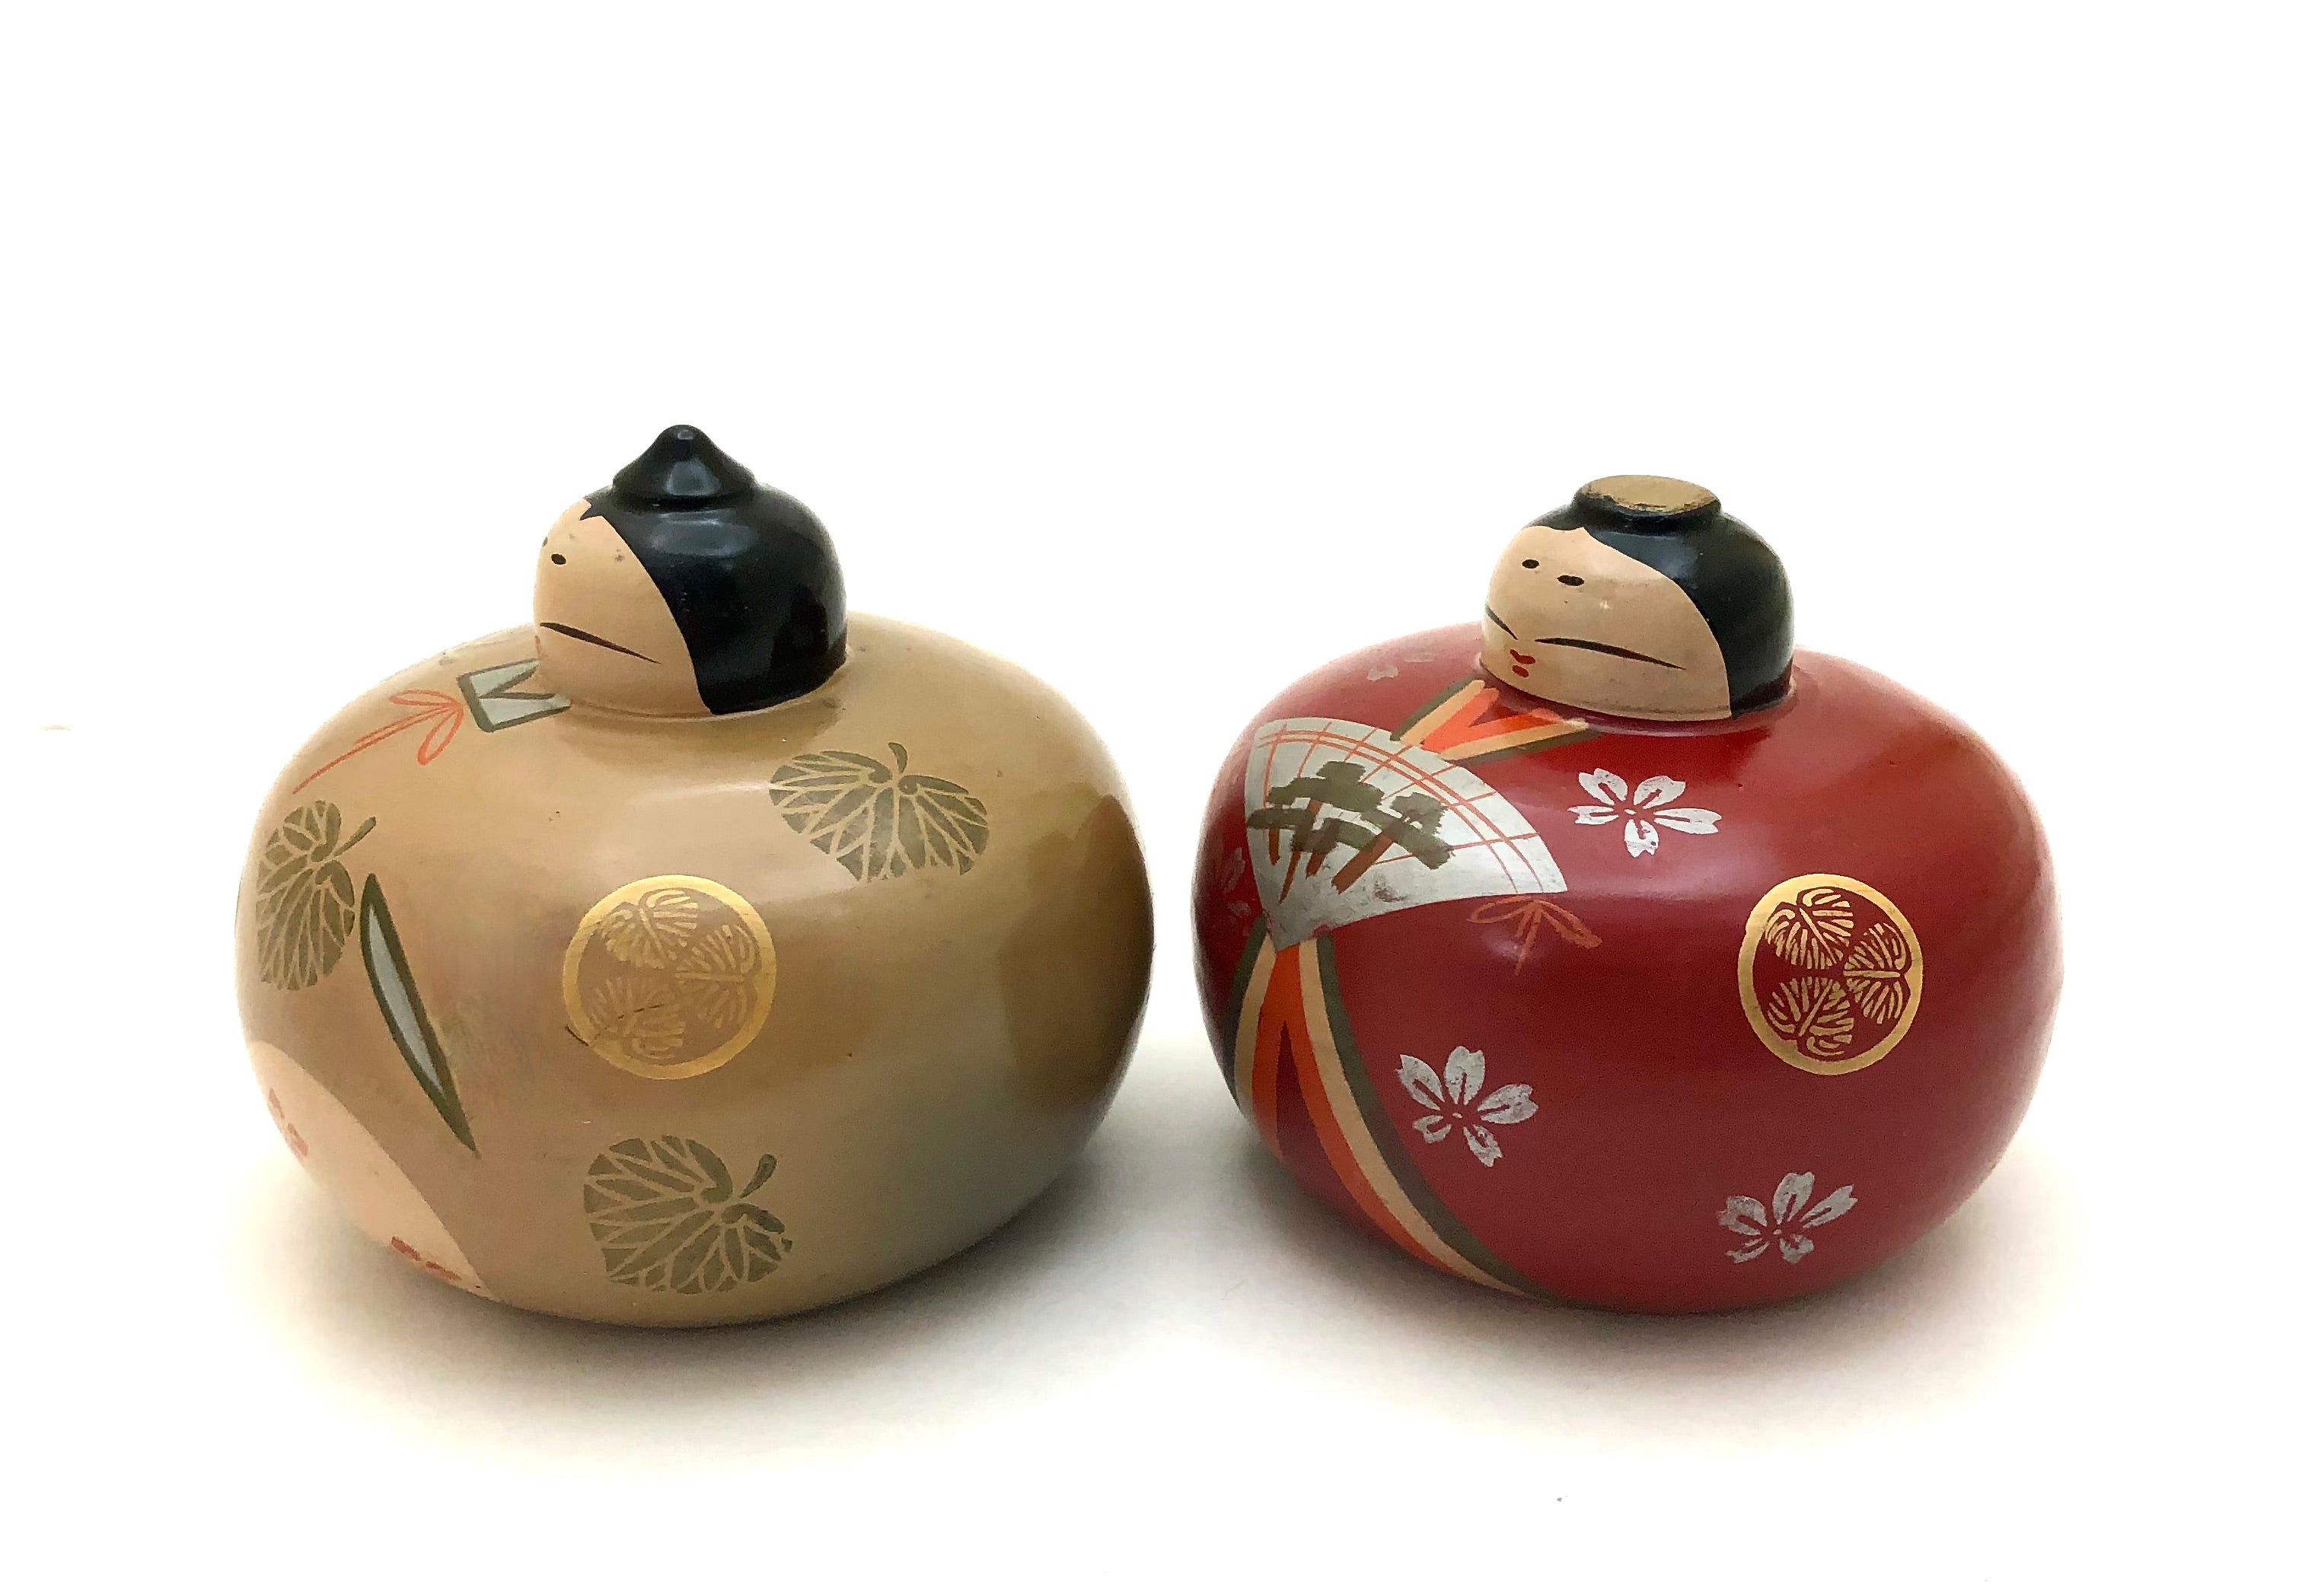 Vintage Japanese Kokeshi Wooden Ouchi-Nuri Hina Doll Lacquered Emperor and Princess | Ouchi Lacquerware